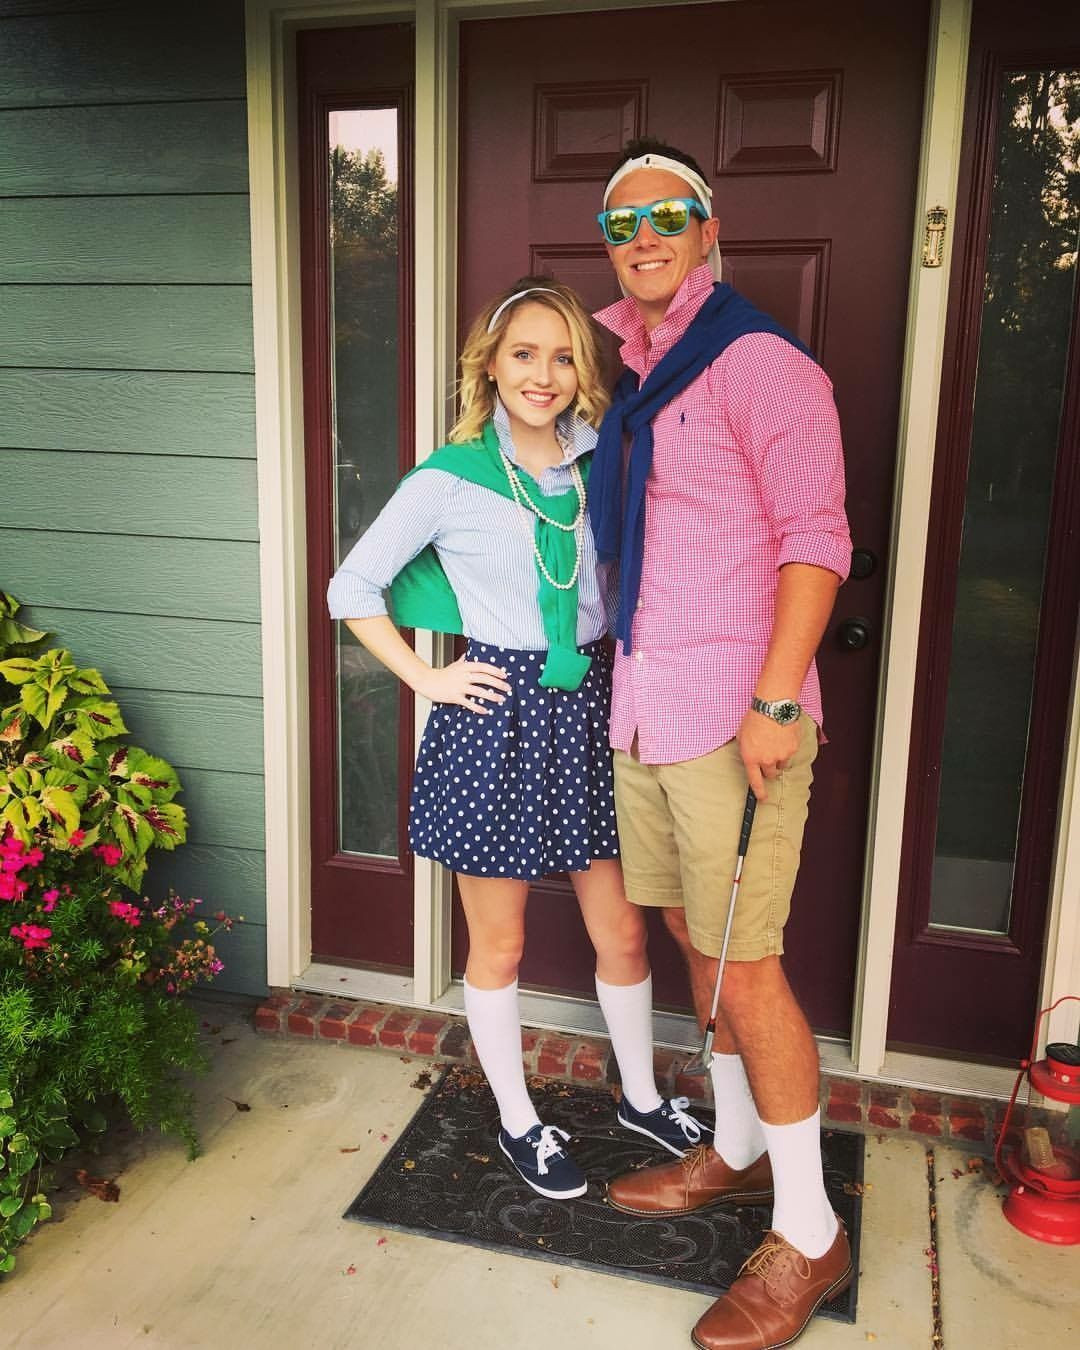 Pool Party Dress Up Ideas
 Country club "preppy" costume in 2019